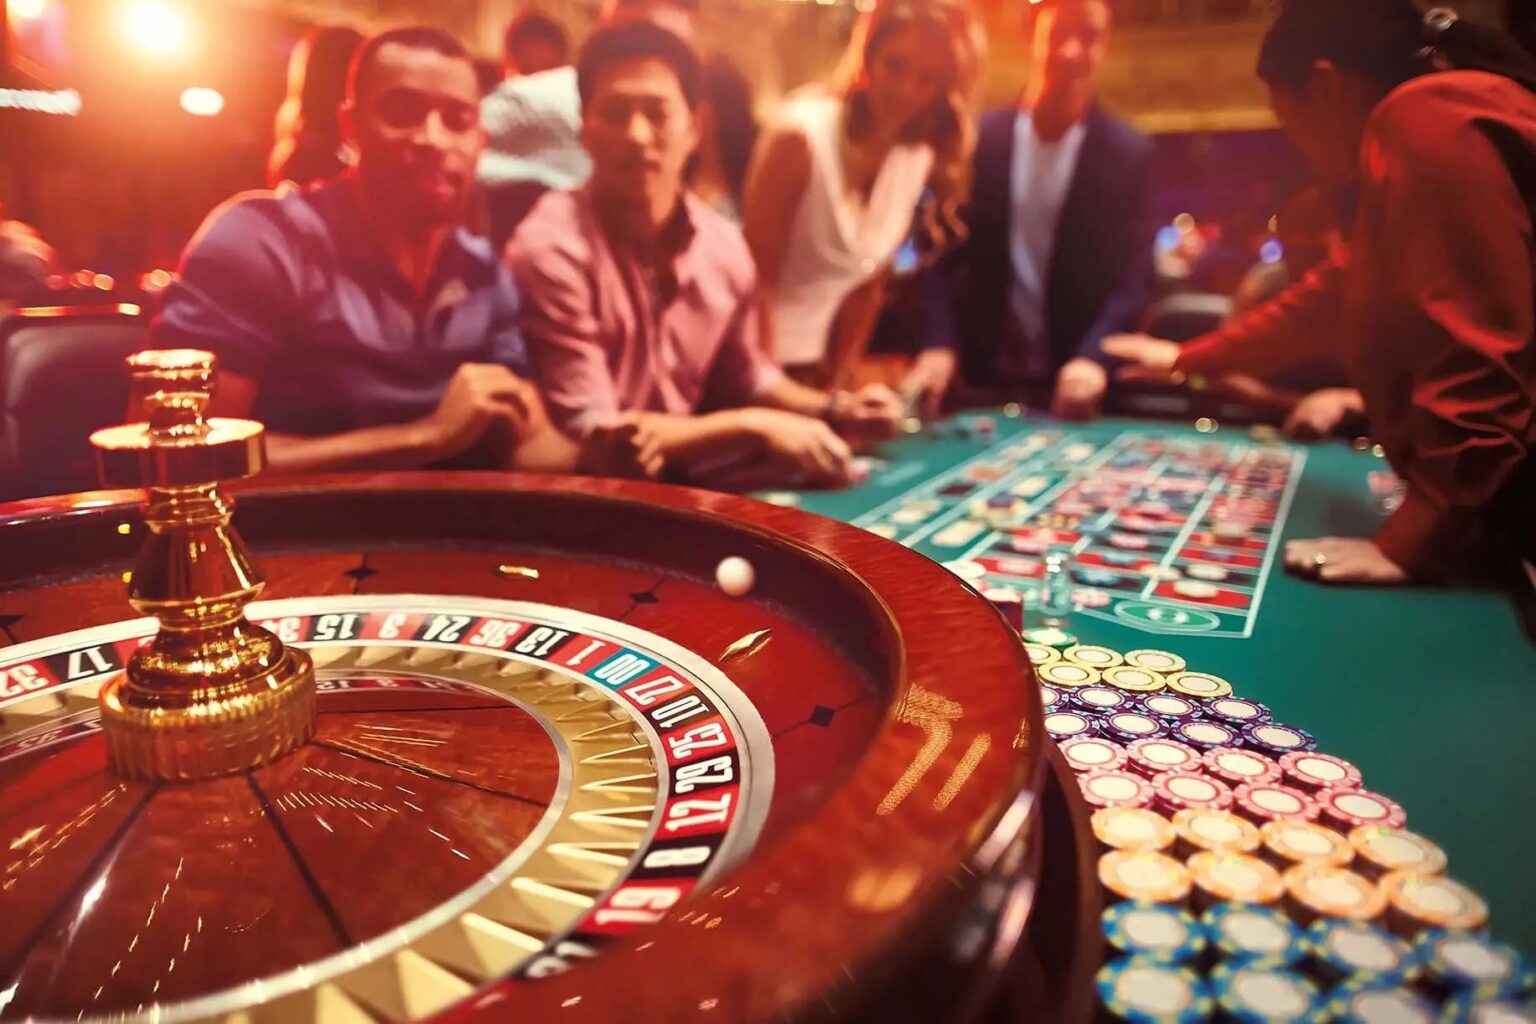 There are countless, amazing stories about casinos and the people who inhabit them. Check out some of the lesser known casino movies & series you've missed.